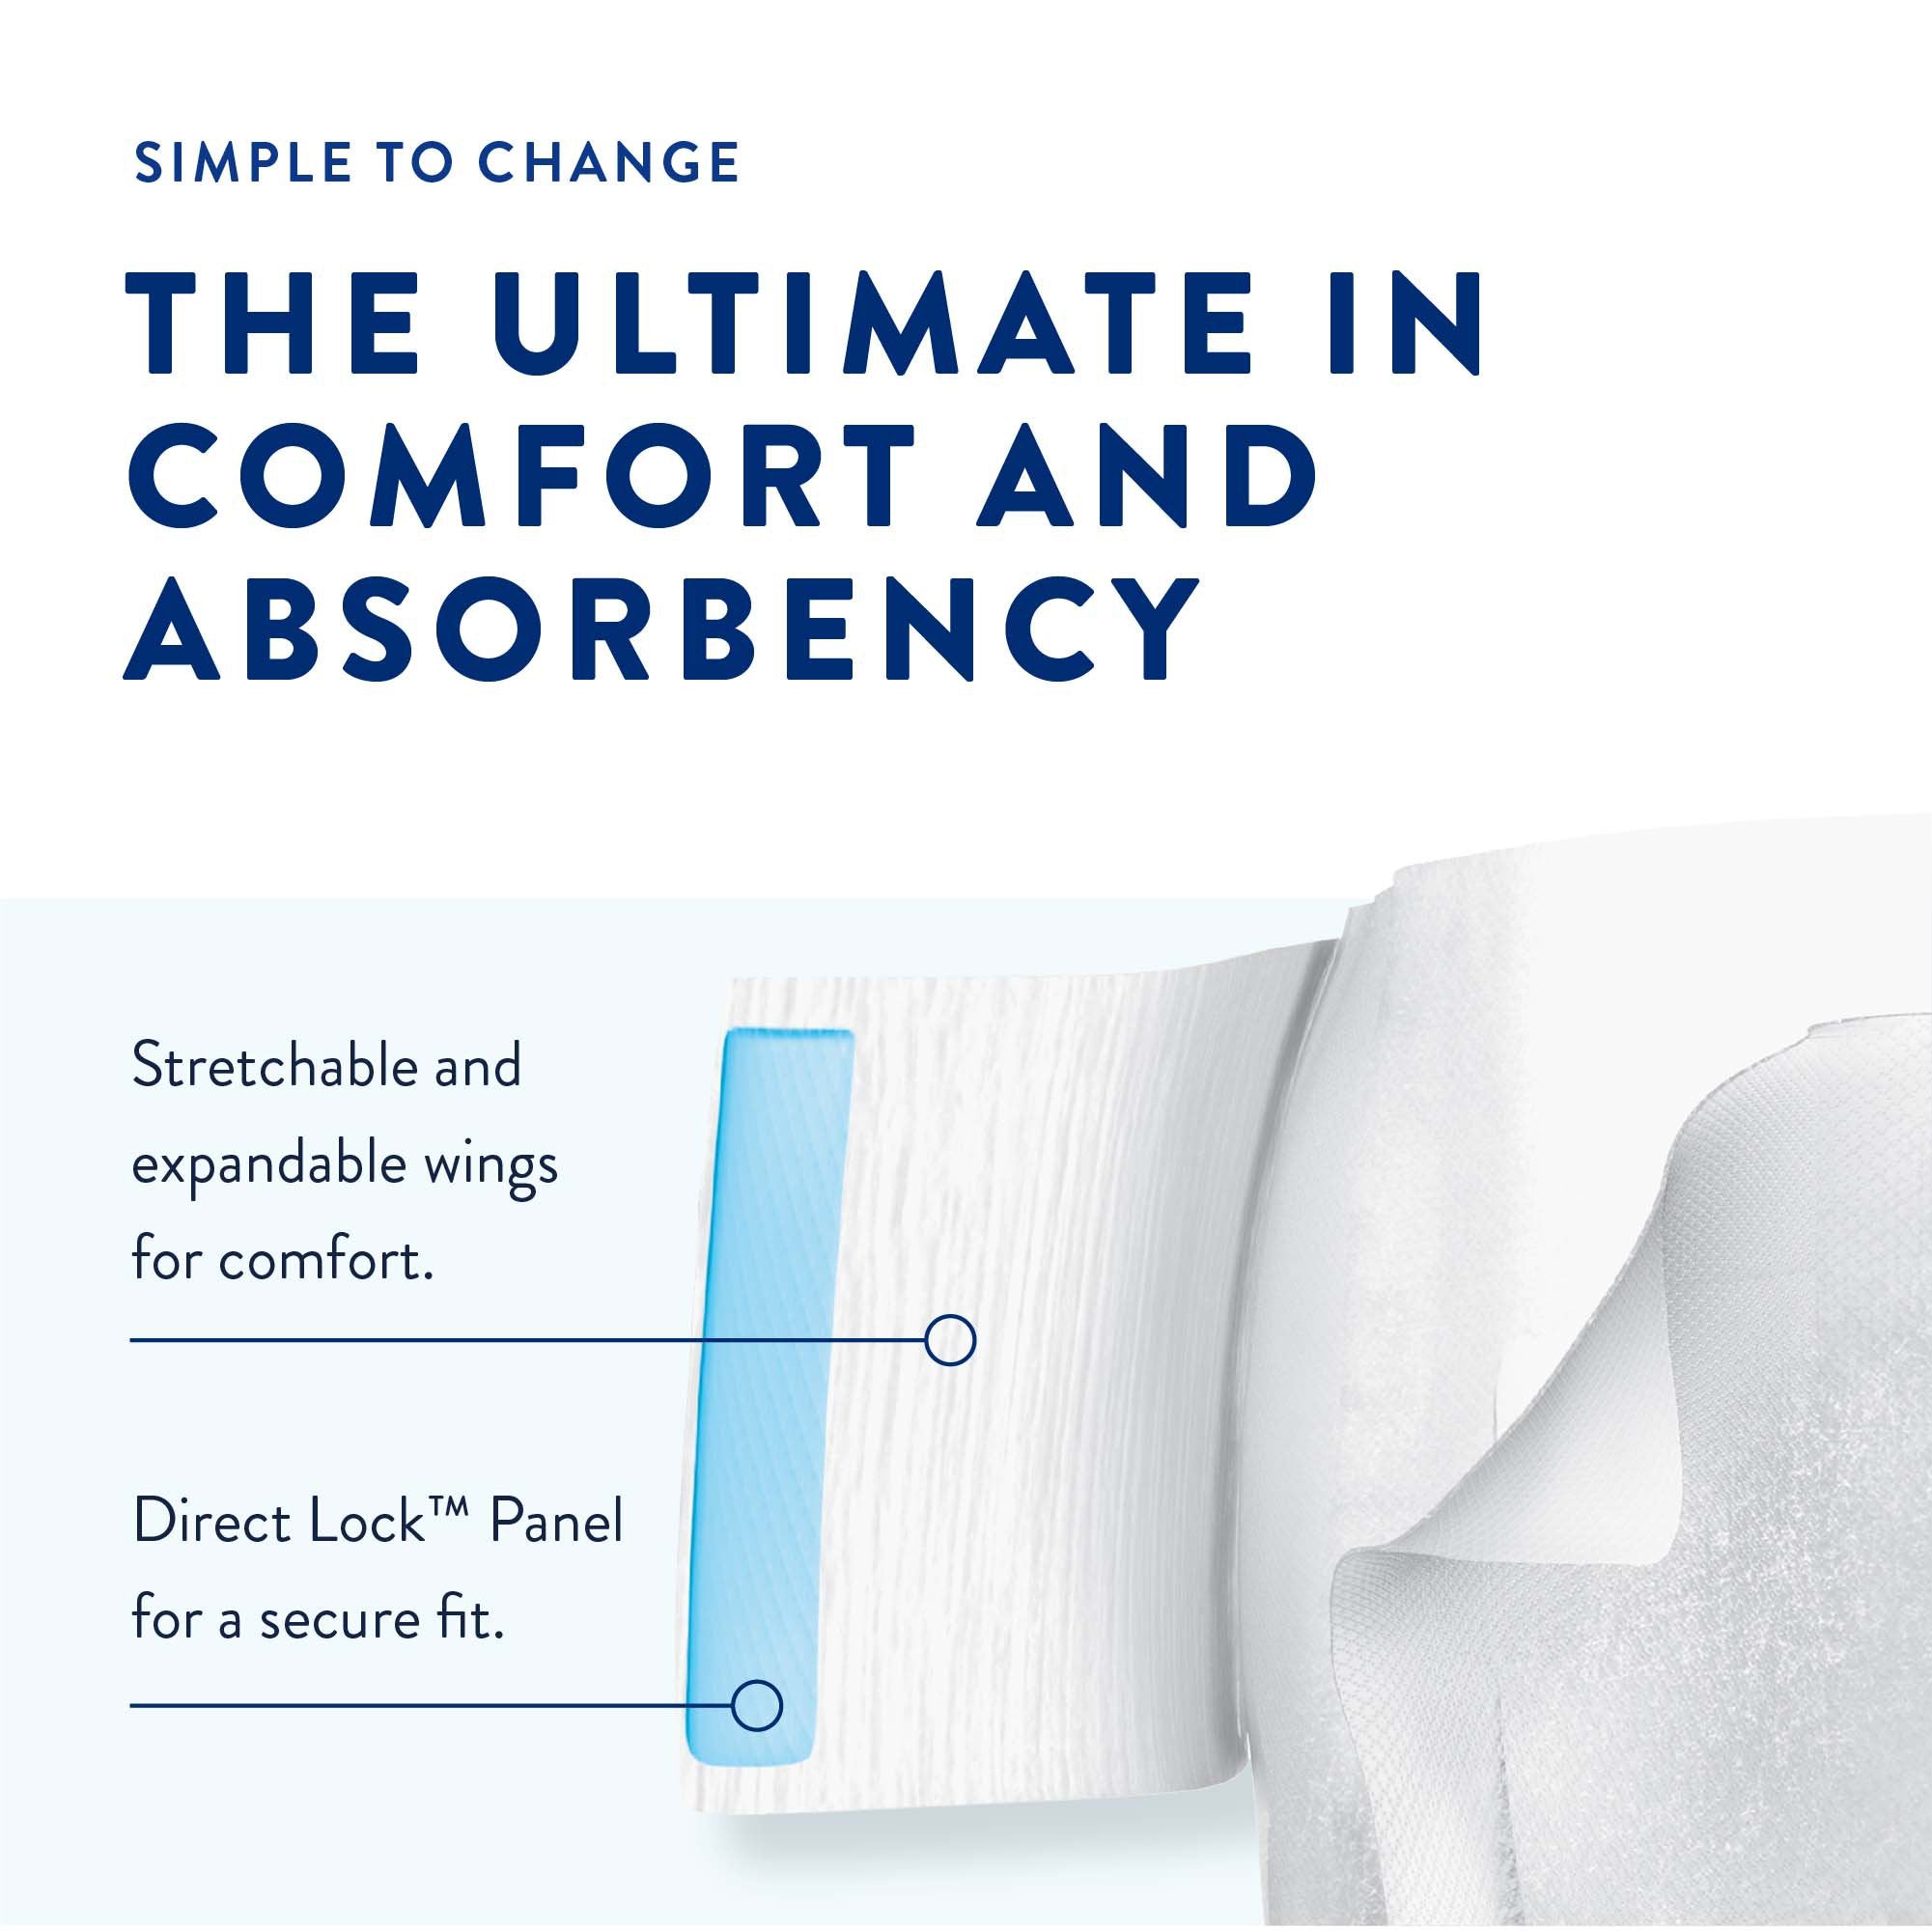 Unisex Adult Incontinence Brief Prevail Air Overnight Size 1 Disposable Heavy Absorbency